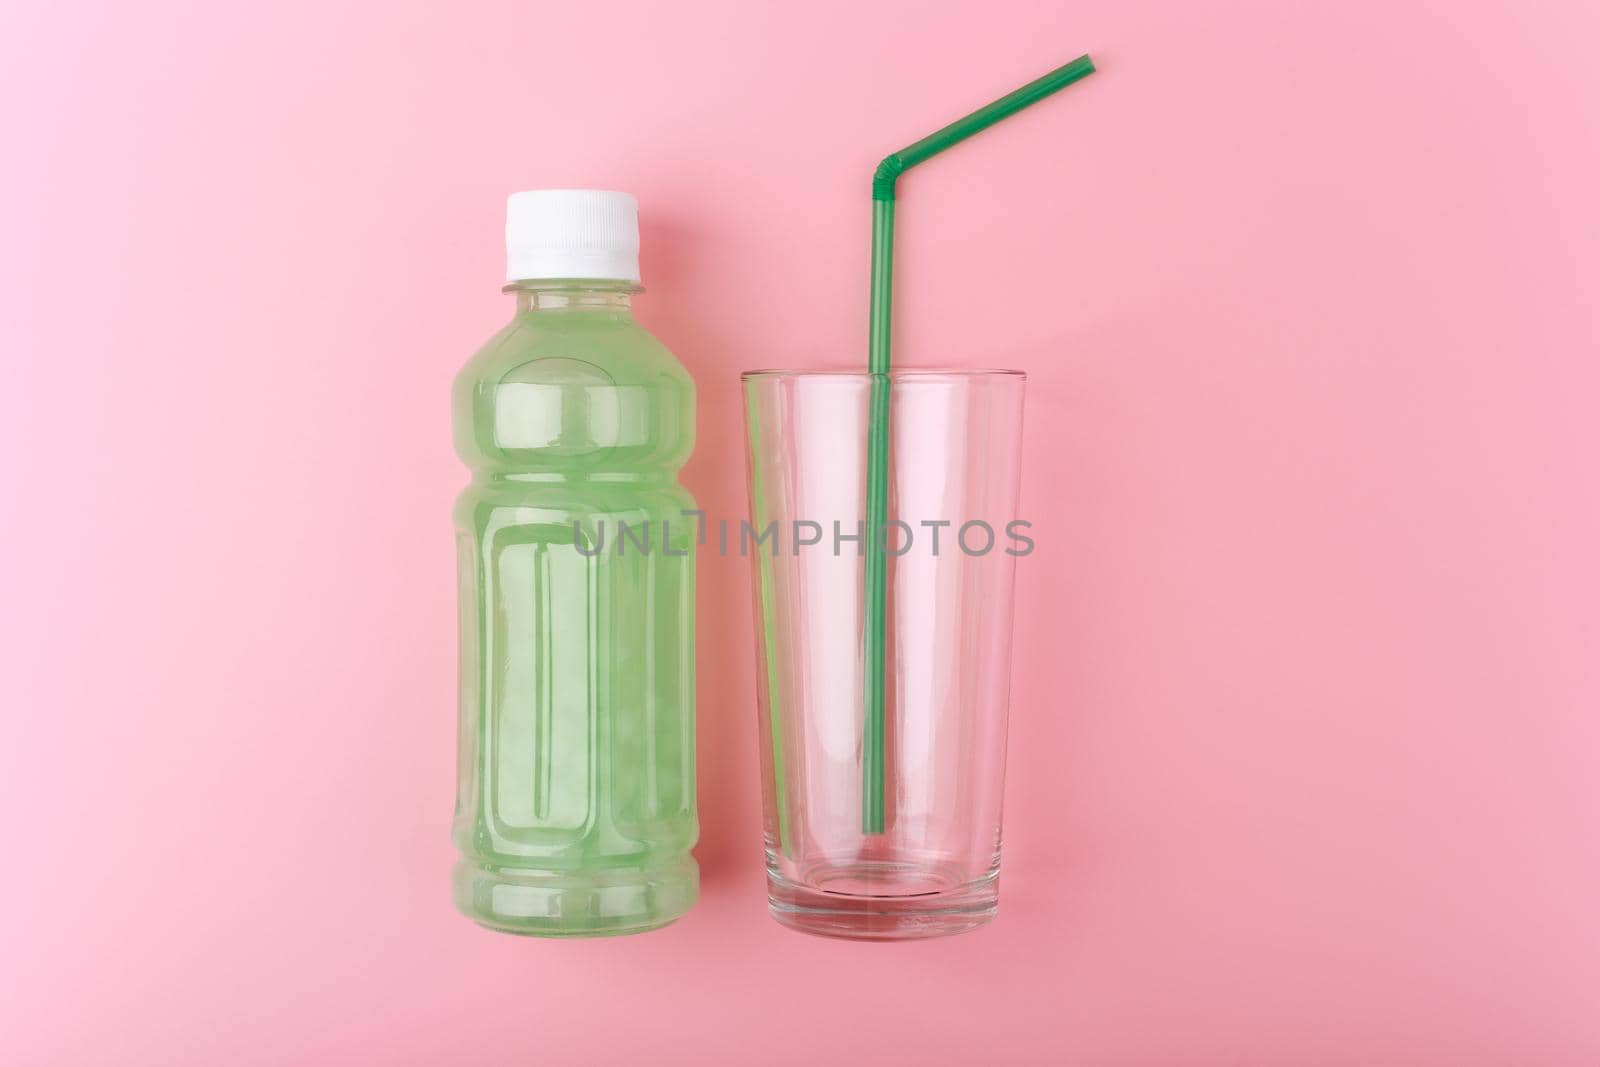 Creative flat lay with transparent plastic bottle with light green detox drink next to empty glass with green straw on bright pink background. Concept of weight loss, dieting and clean eating